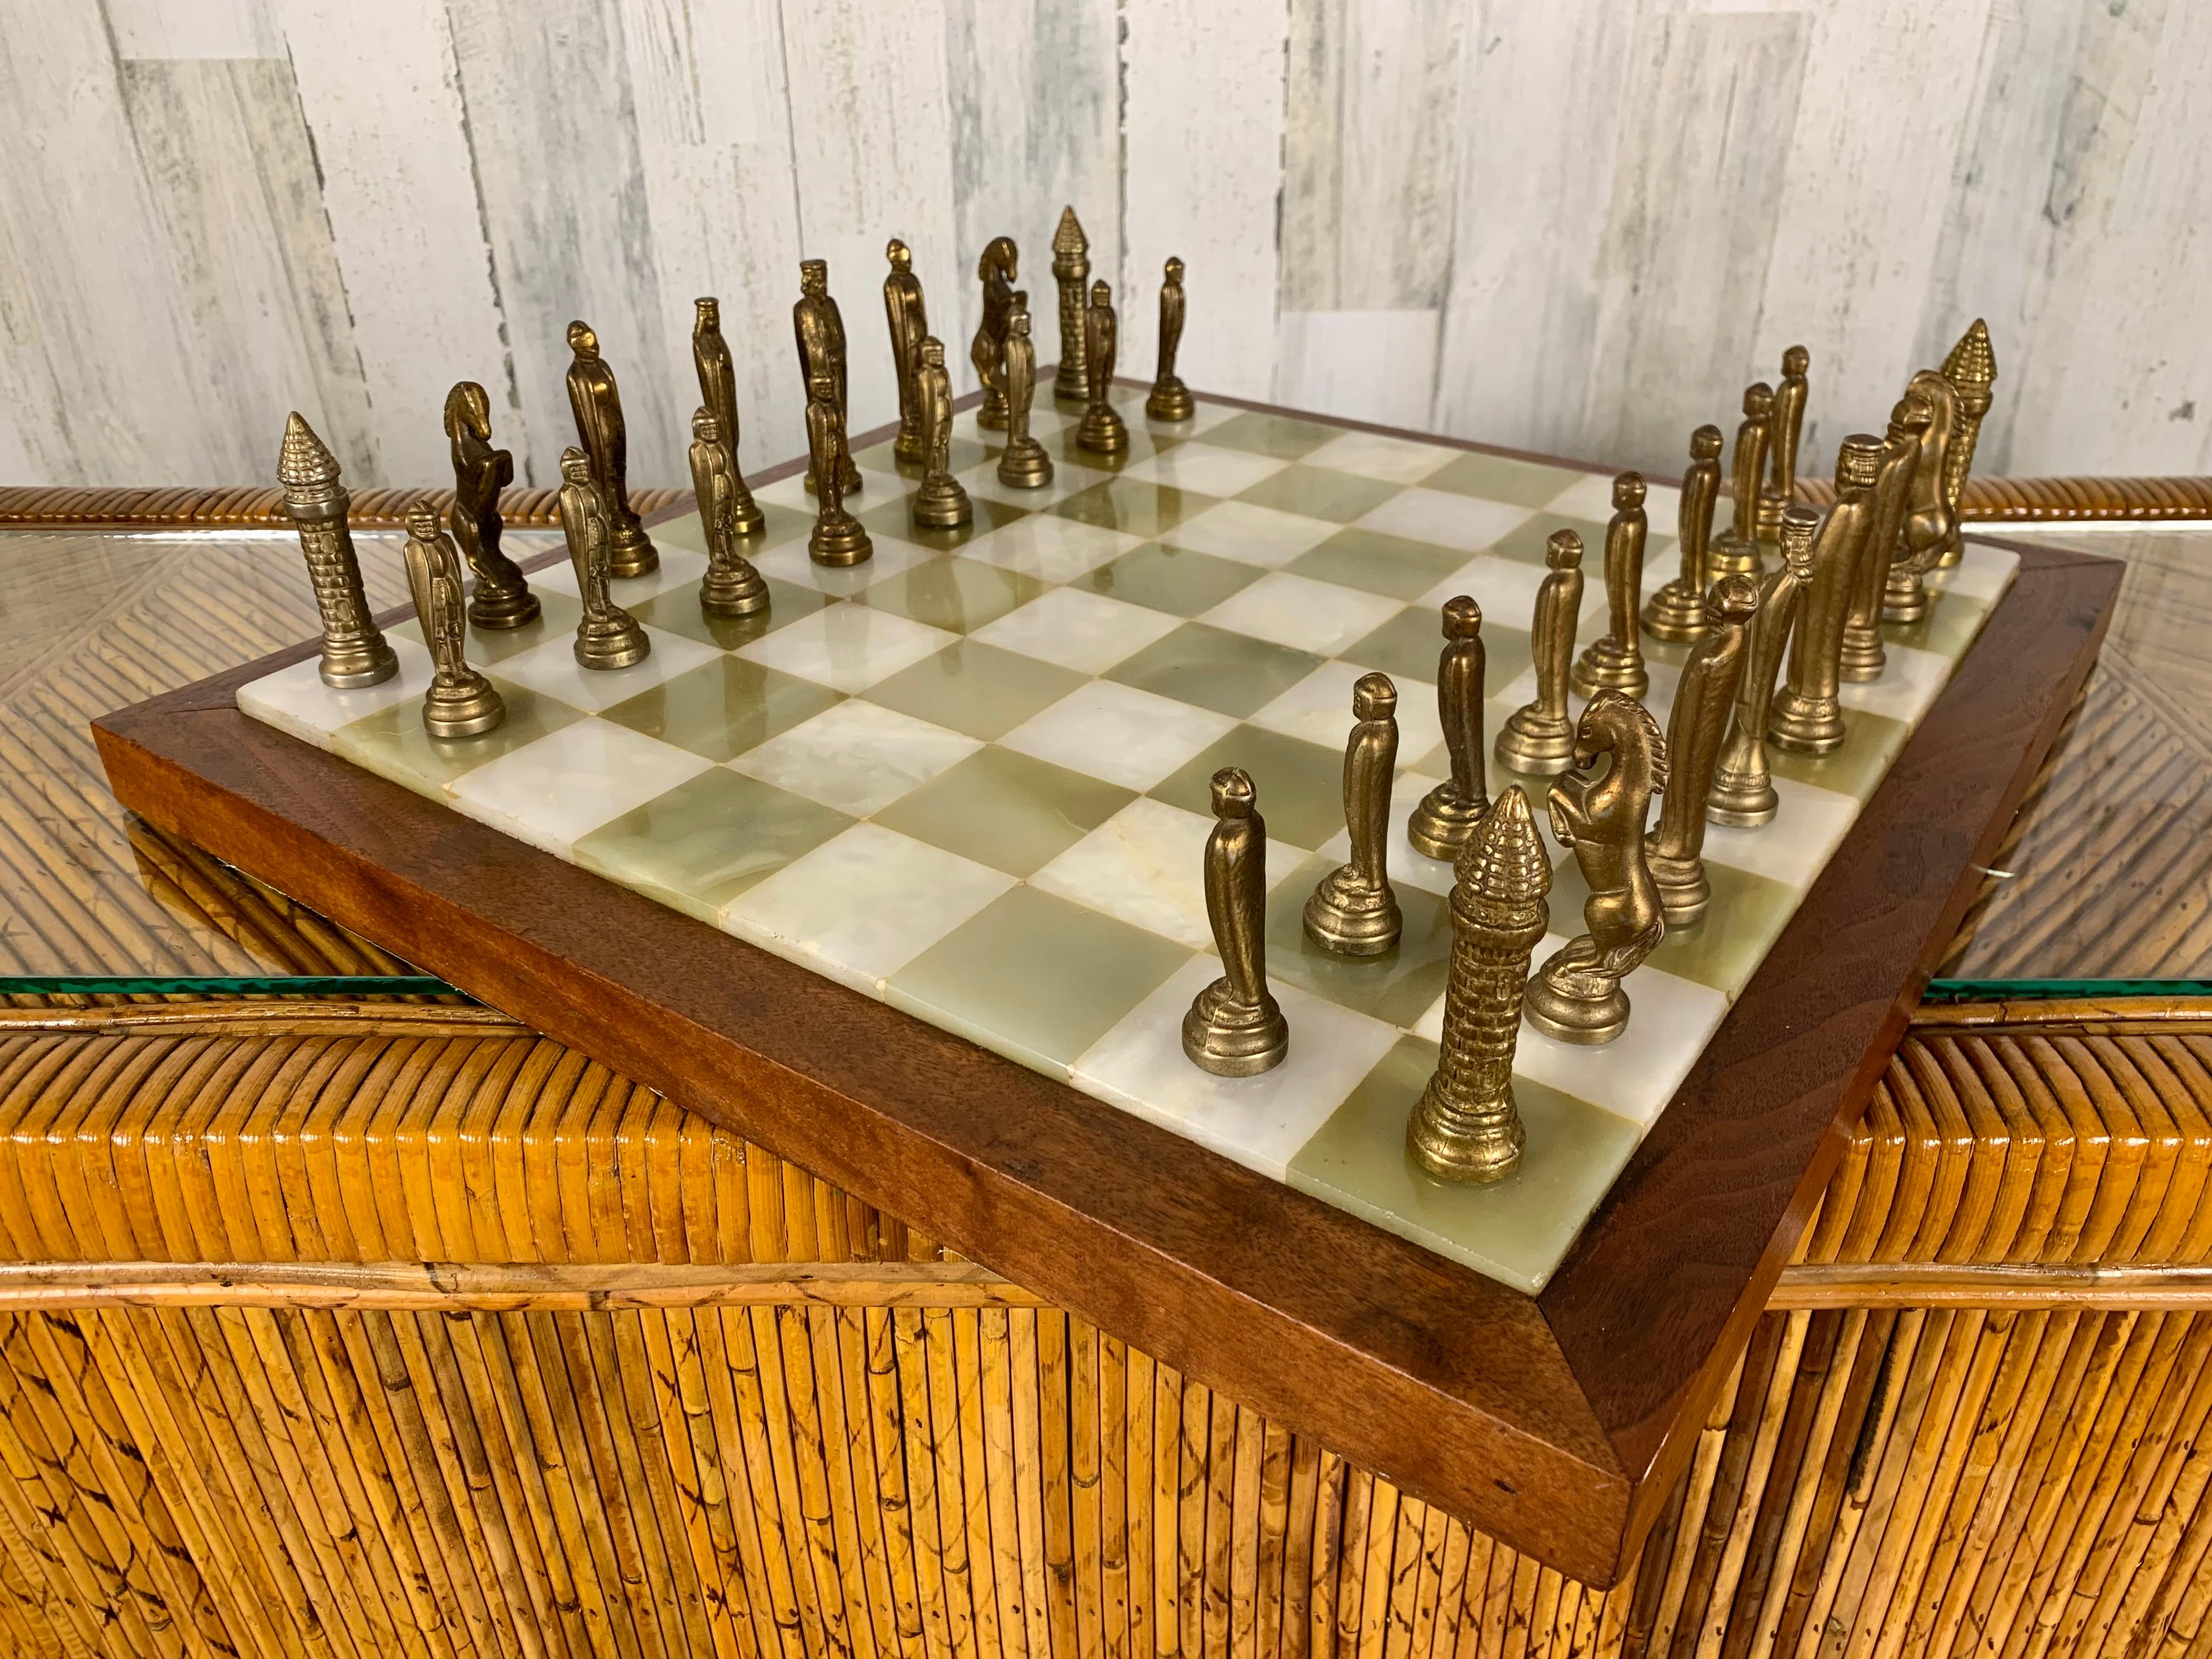 Combination of white and green onyx on a walnut frame with brass chessman. The wood box is covered in gold embossed leather with upholstered interior. This set includes game board, brass chessman and leather covered box.